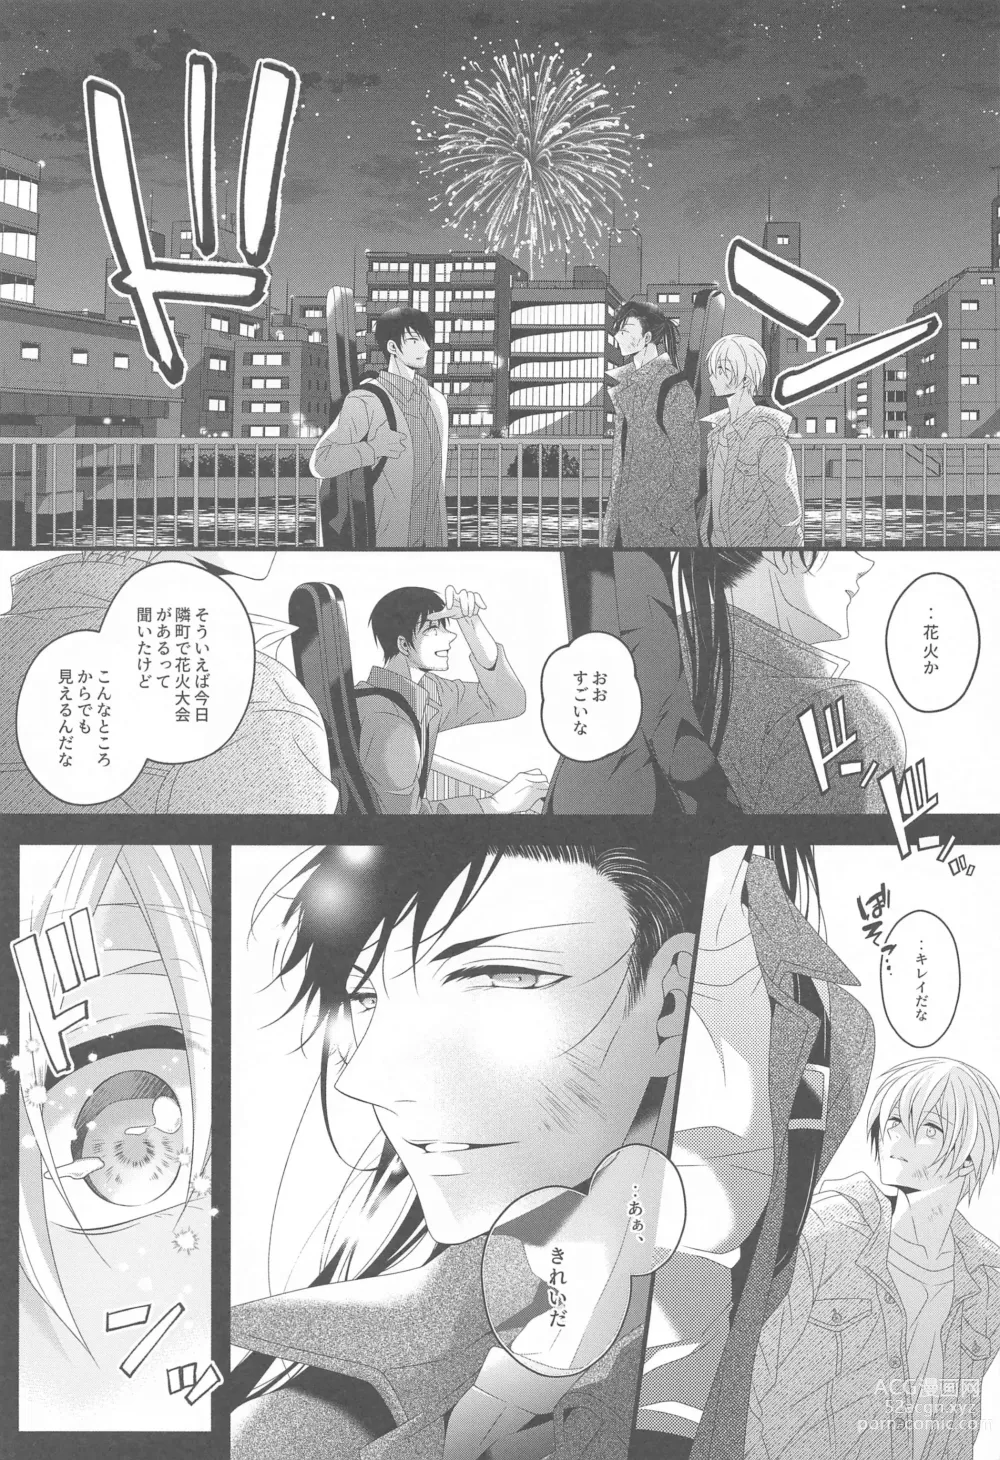 Page 4 of doujinshi Aibetsuriku no Yosame - A rainy night the pain of separation from loved ones